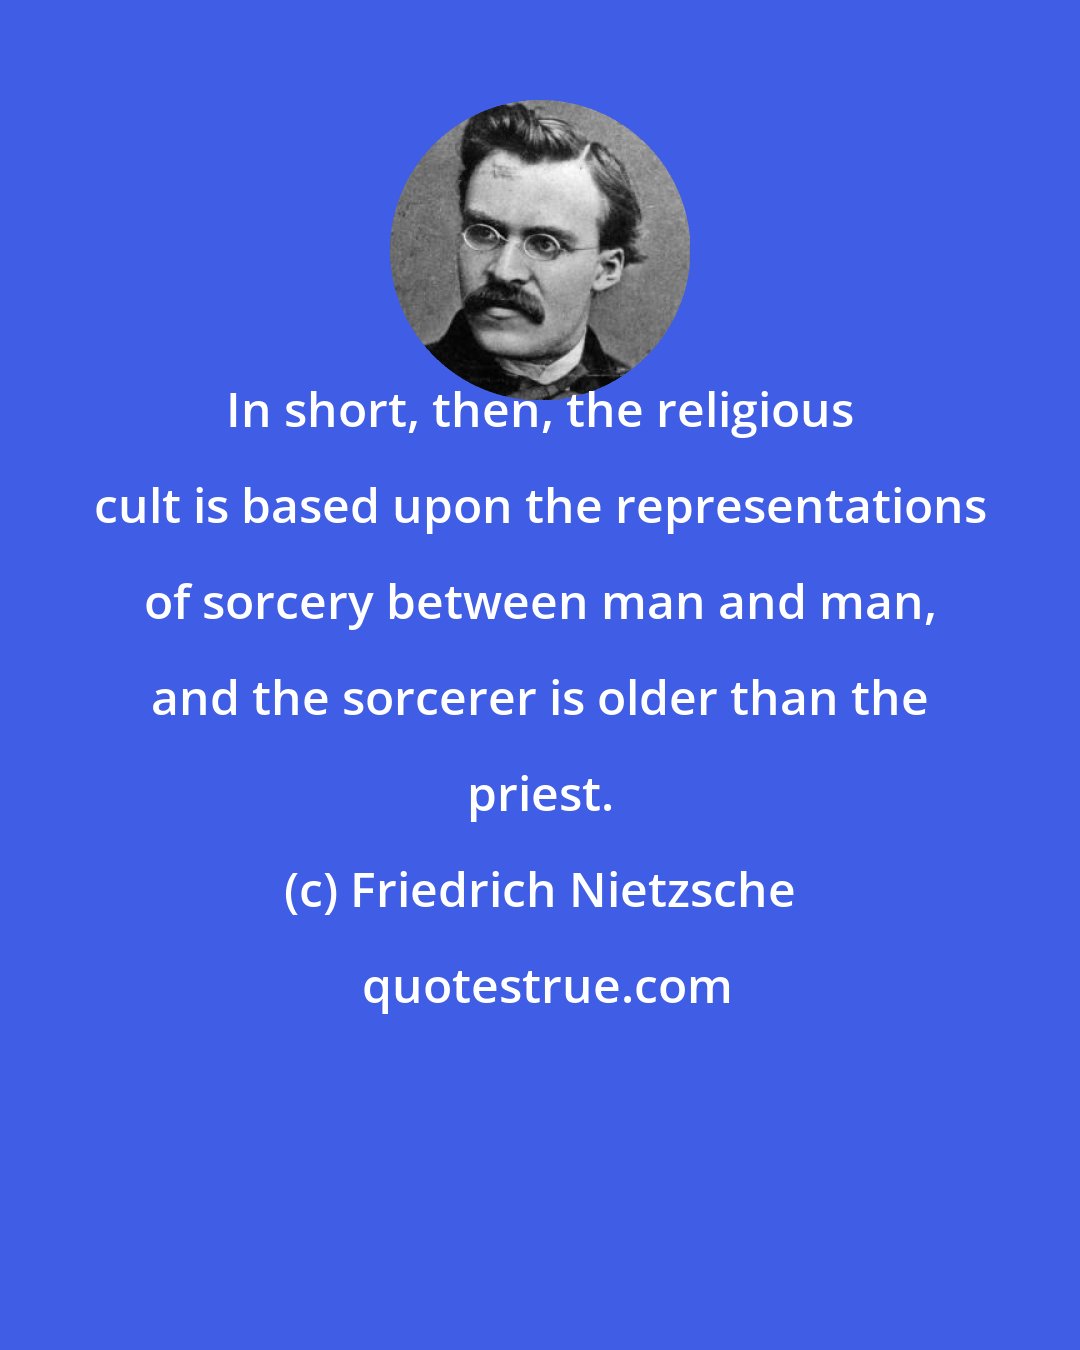 Friedrich Nietzsche: In short, then, the religious cult is based upon the representations of sorcery between man and man, and the sorcerer is older than the priest.